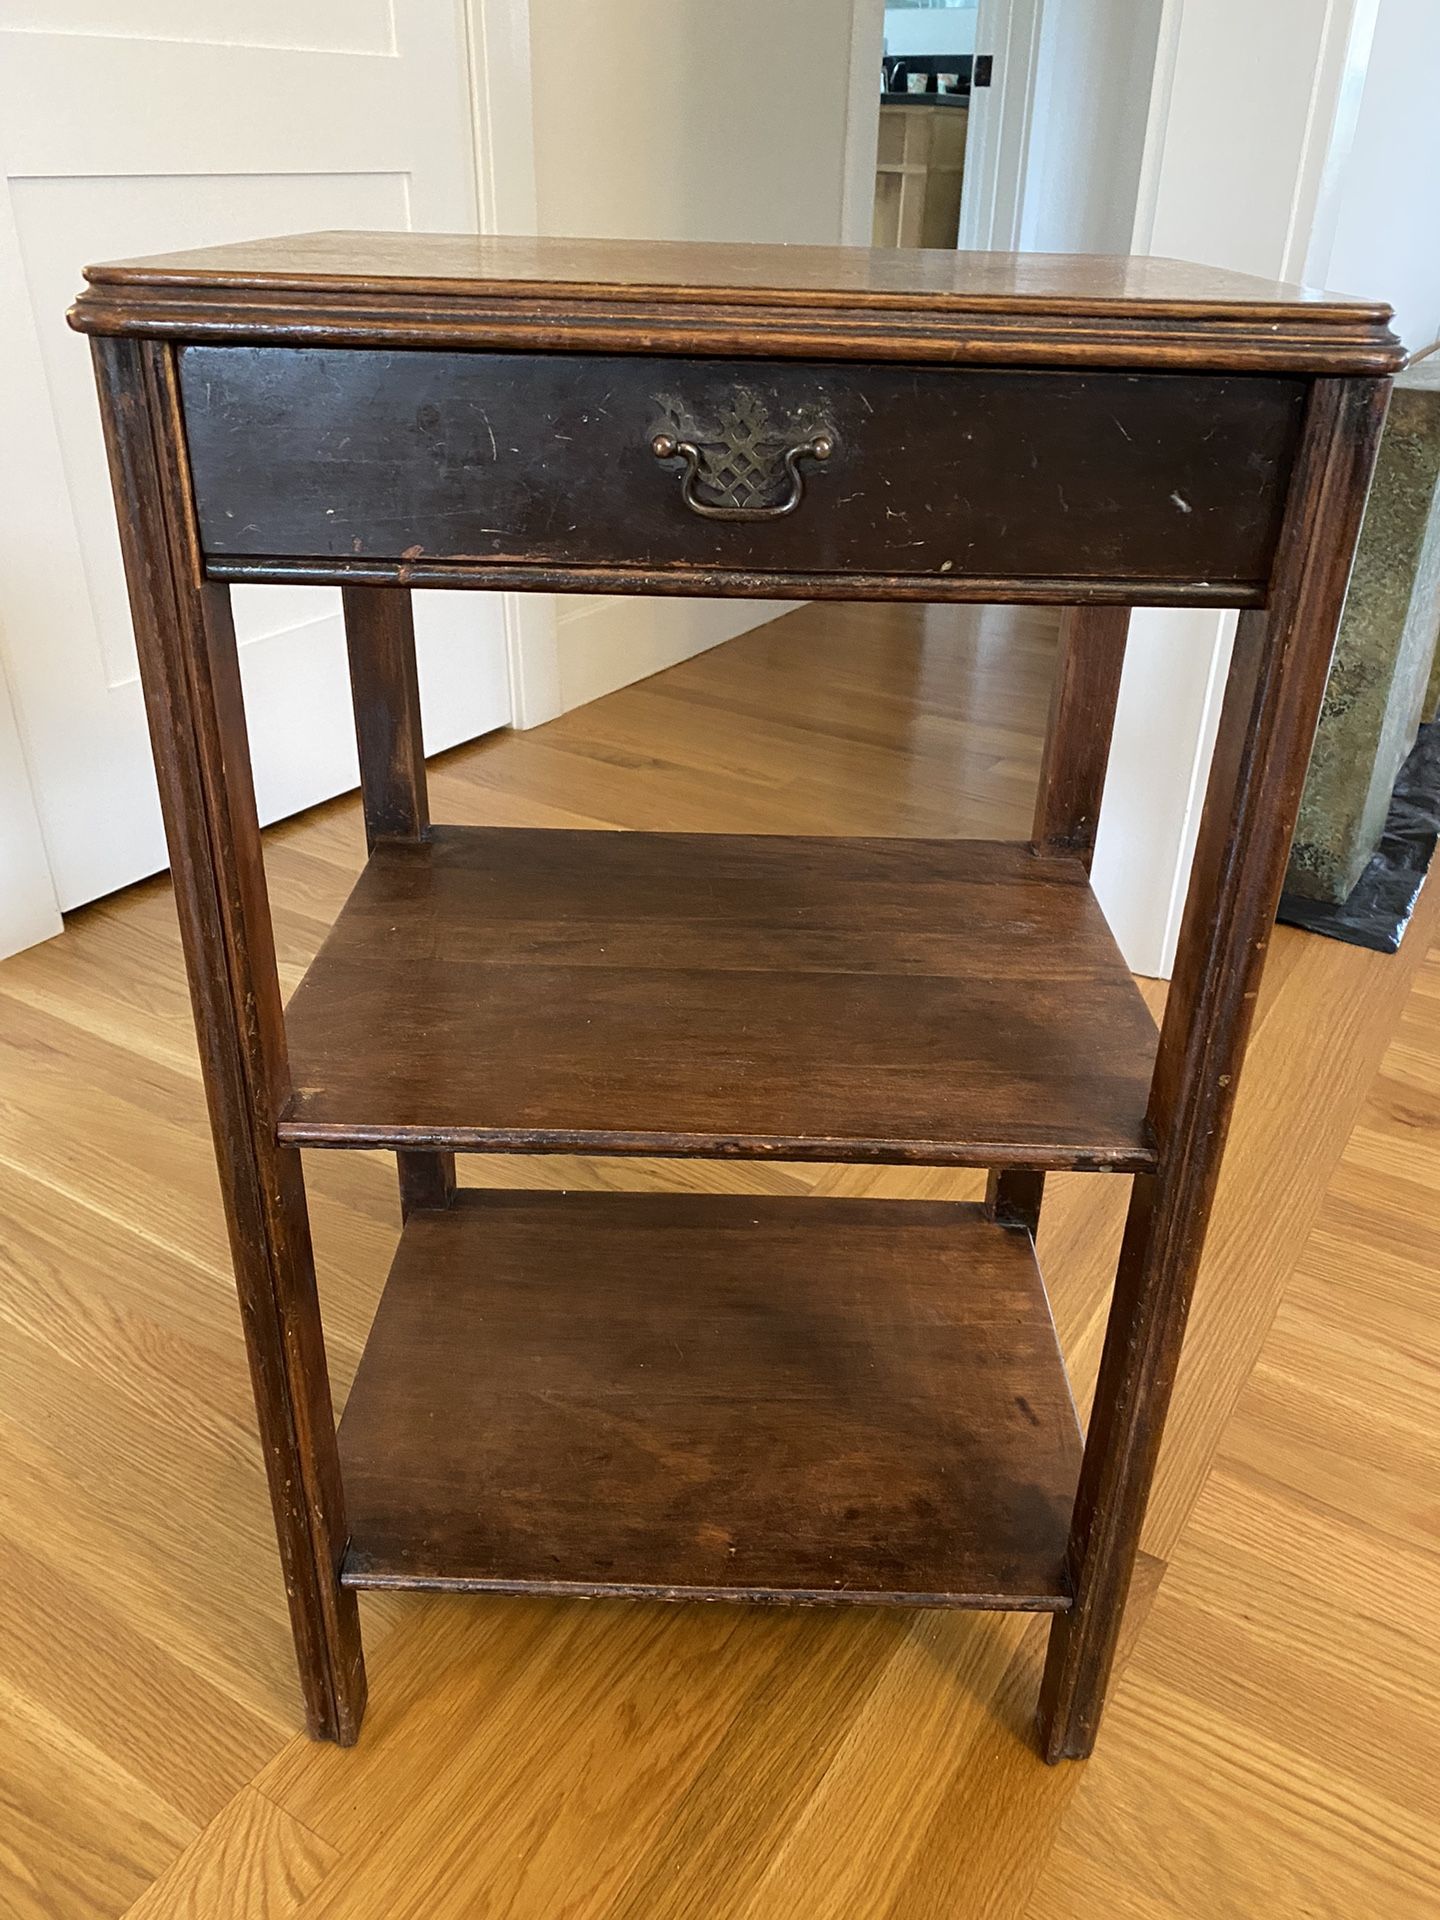 Side Table w/ Drawer